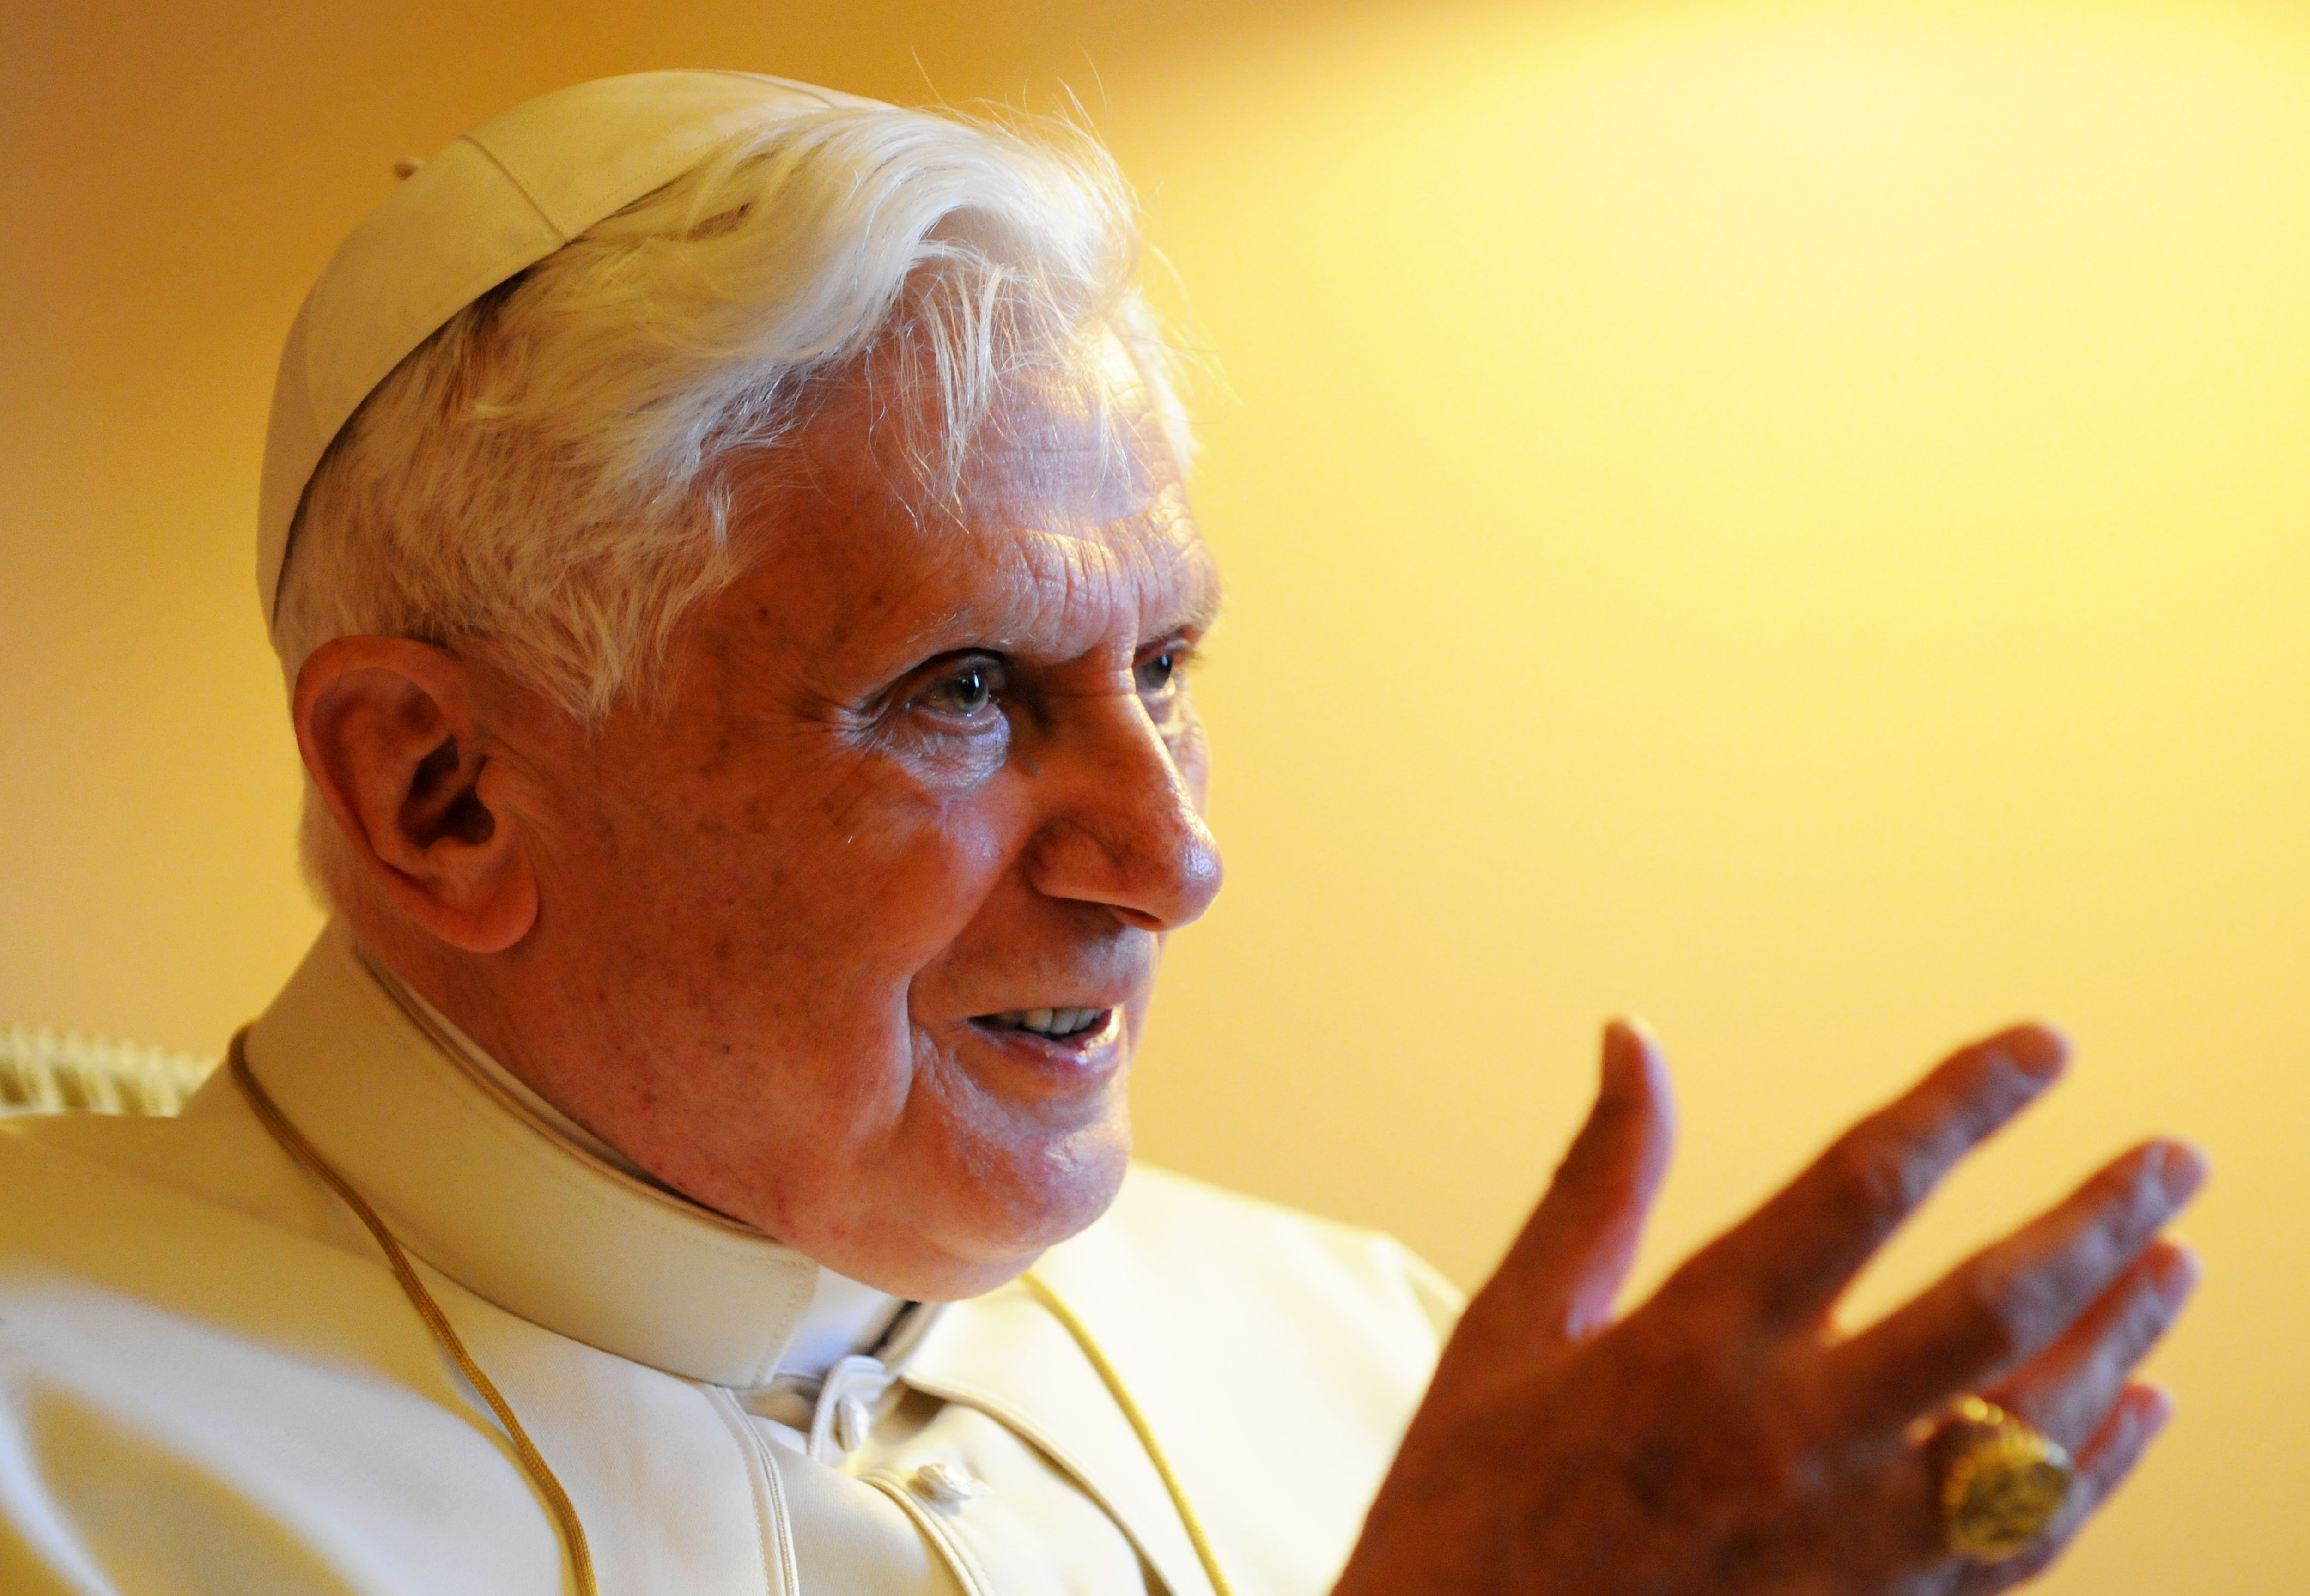 EWTN to air conference on Pope Benedict XVI one year after his death